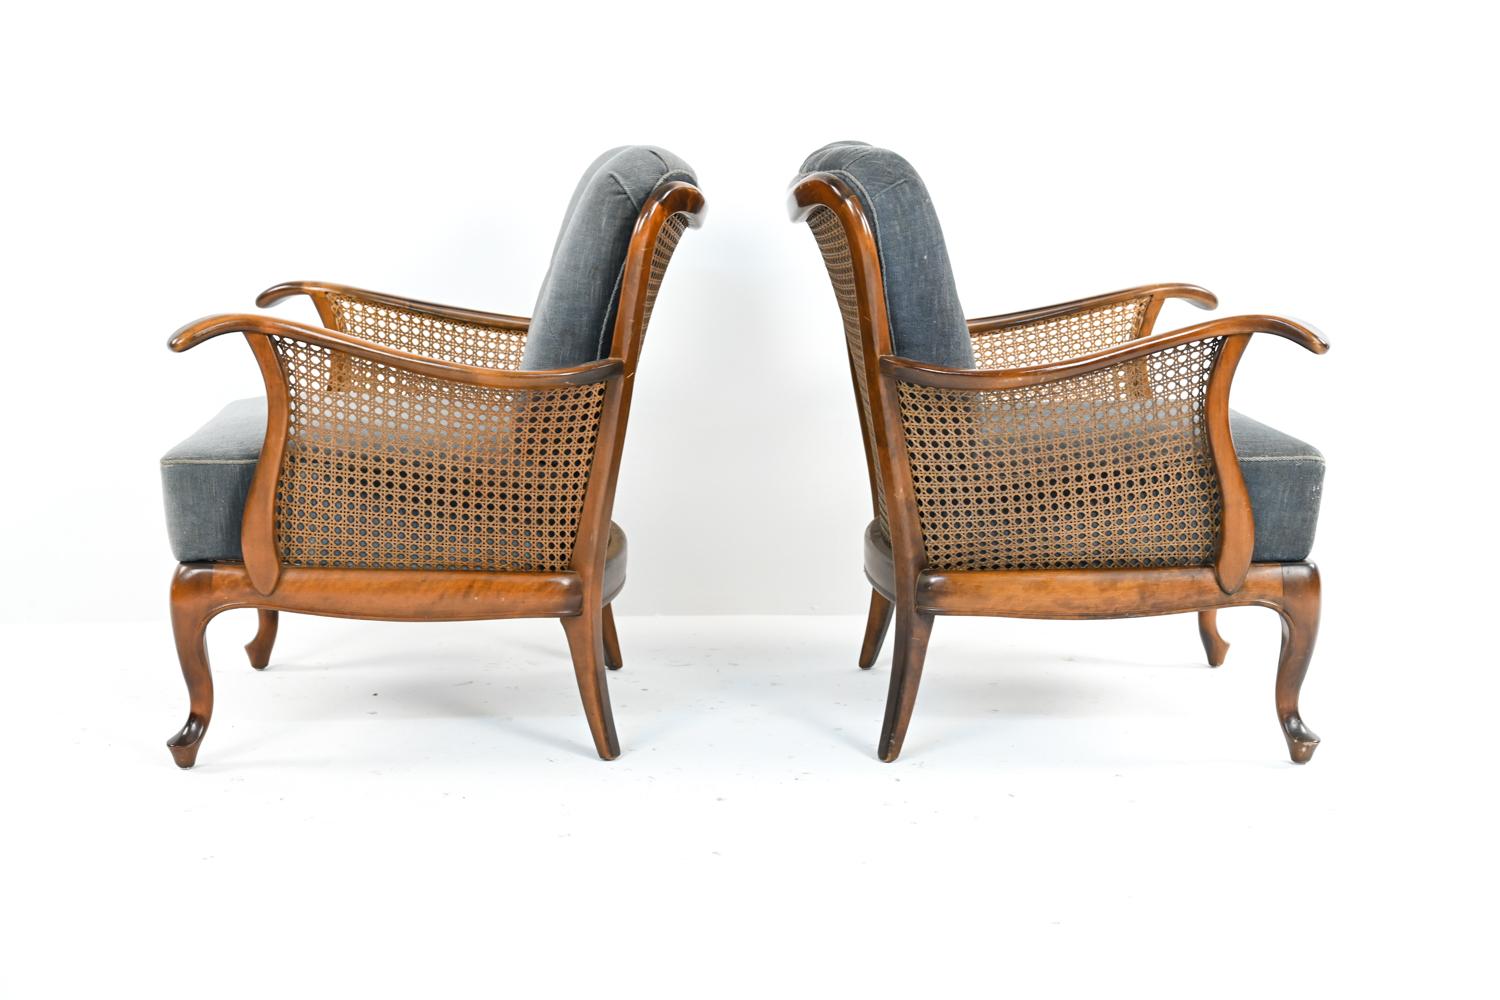 Chenille Pair of Early Danish Modern Caned Bergere Chairs, c. 1940's